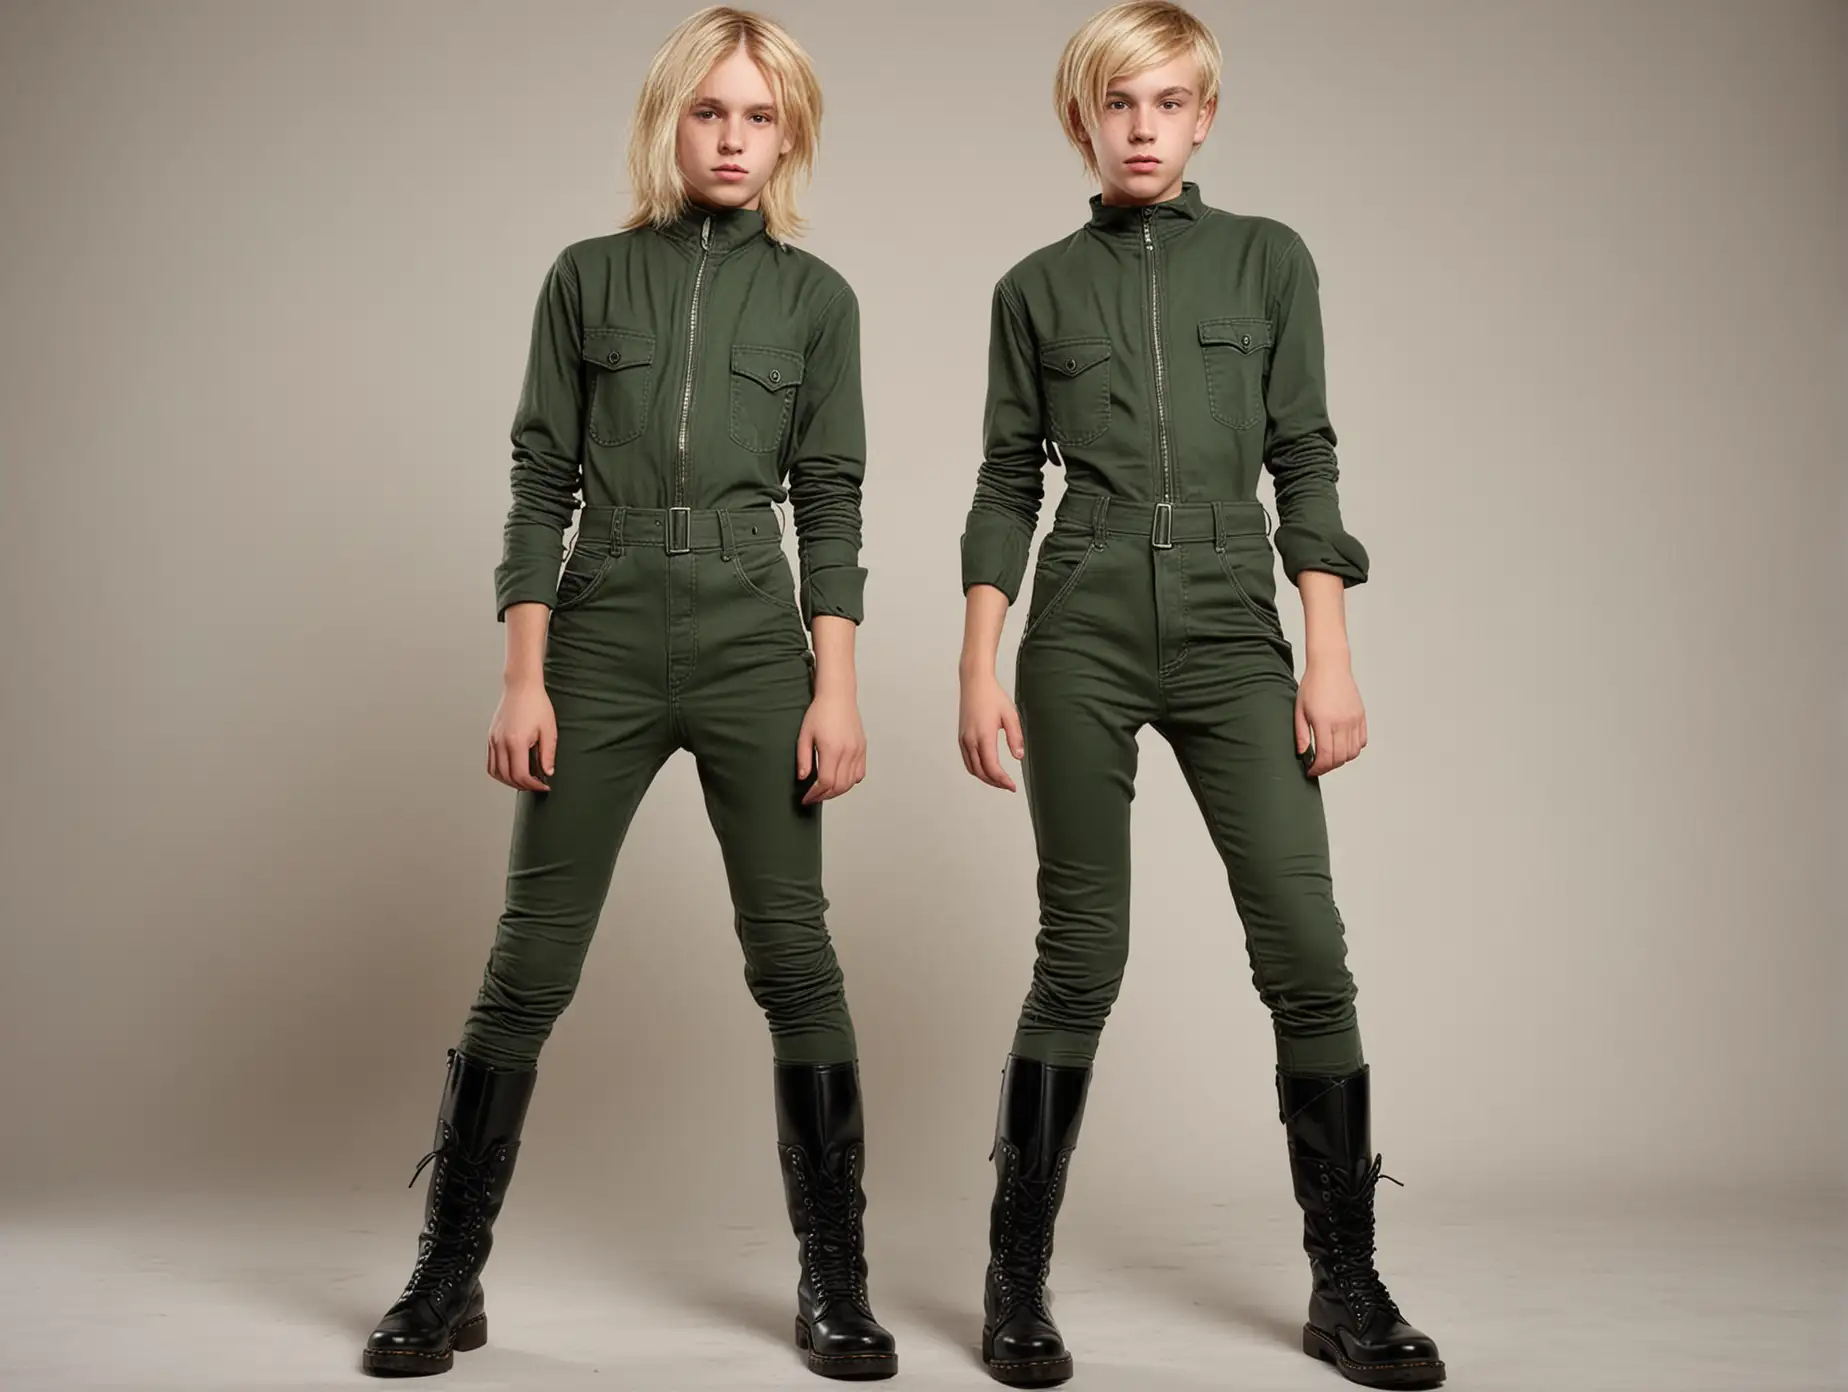 thin 15 year old blond  boy in skin-tight green jumpsuit and black knee-high doc marten boots